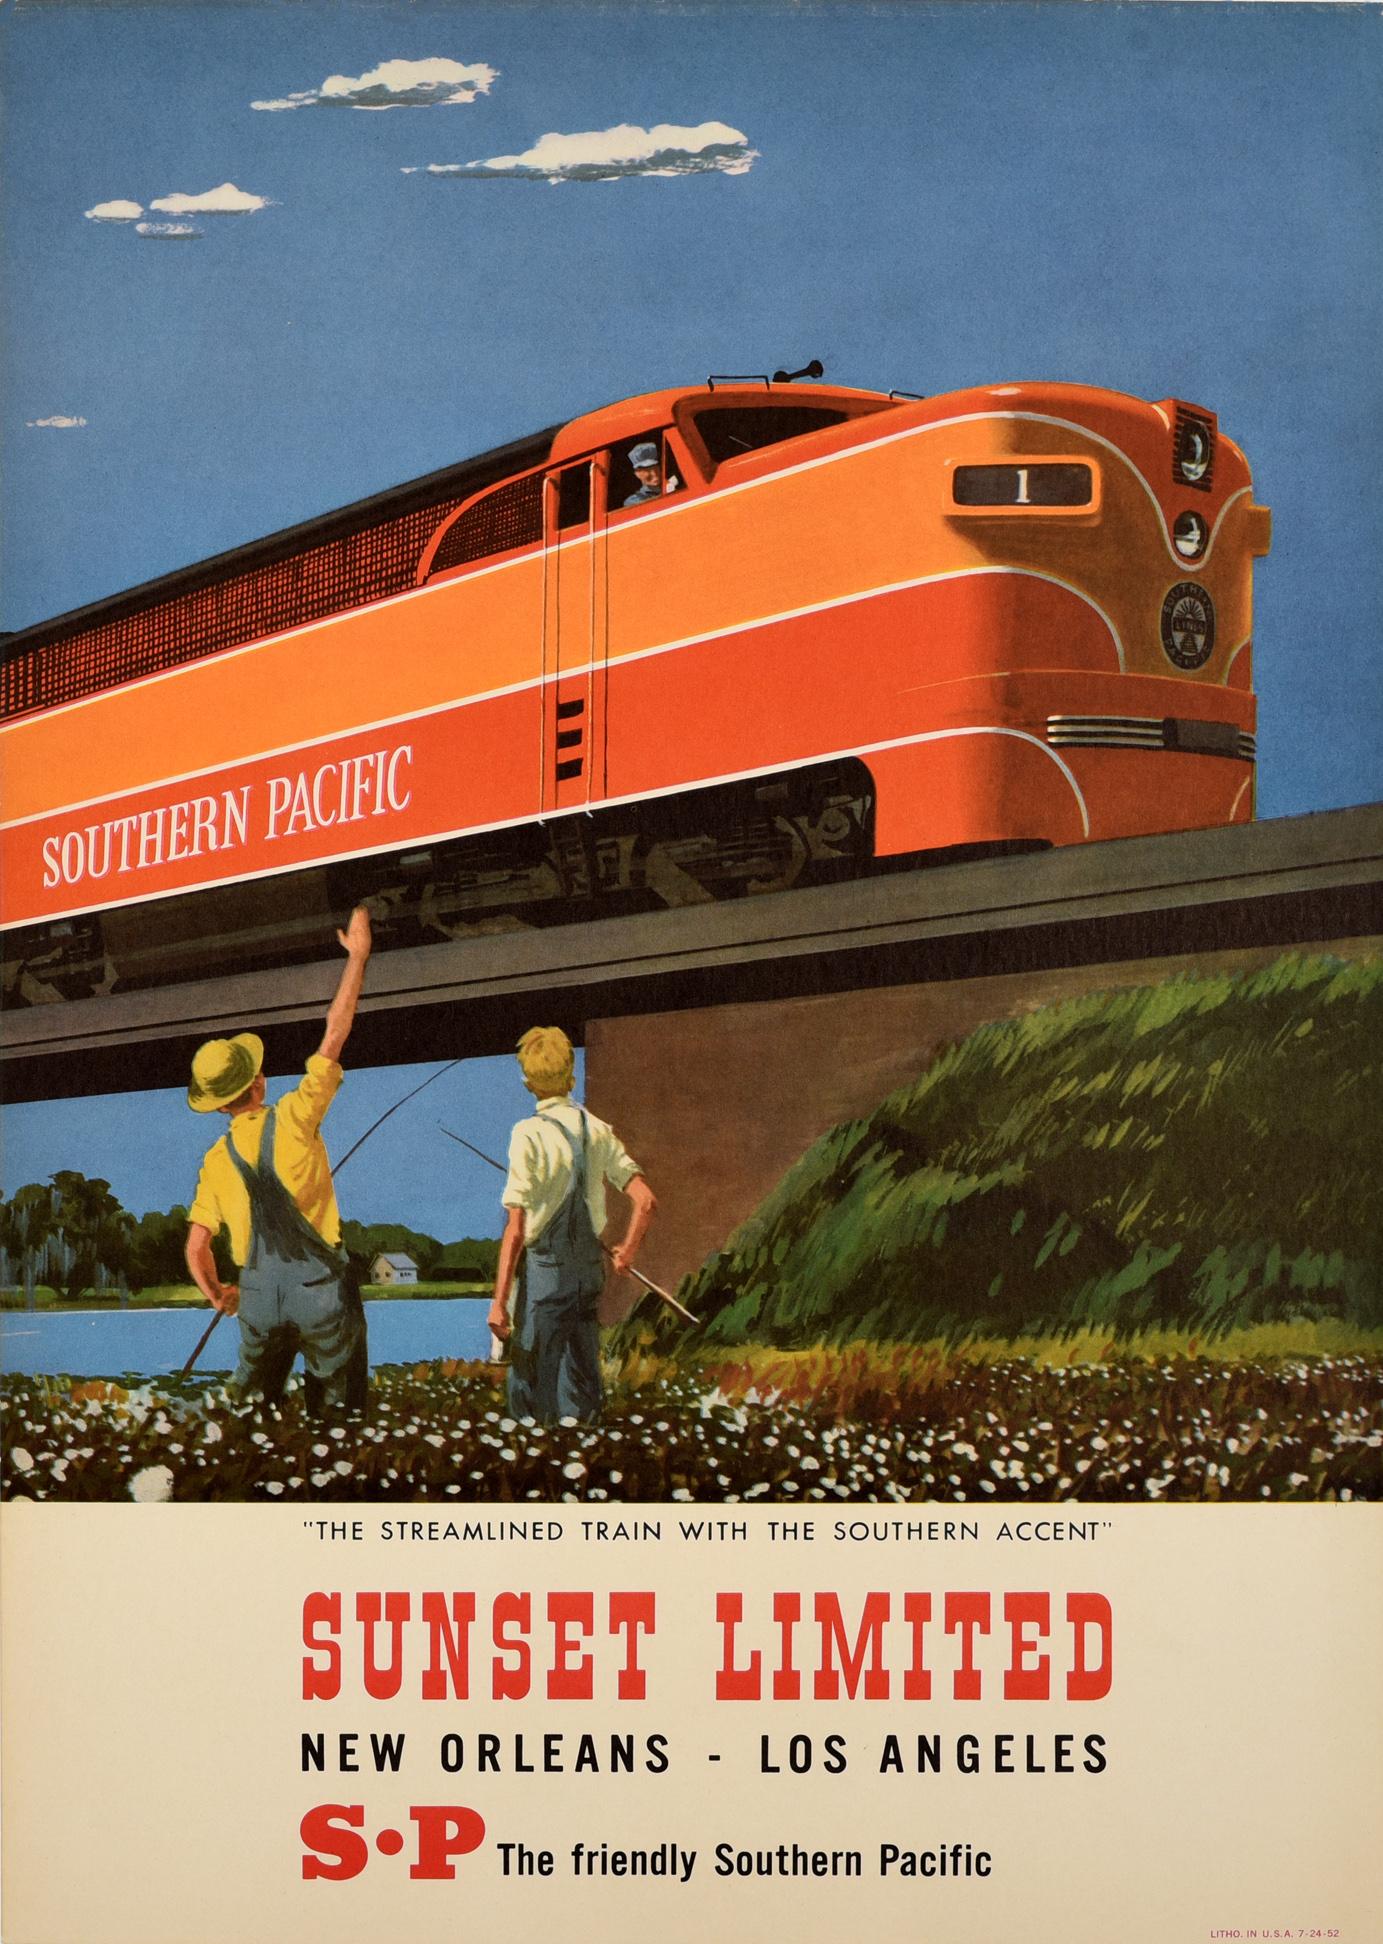 Unknown Print - Original Vintage Poster Southern Pacific Railroad Streamlined Train Sunset Ltd